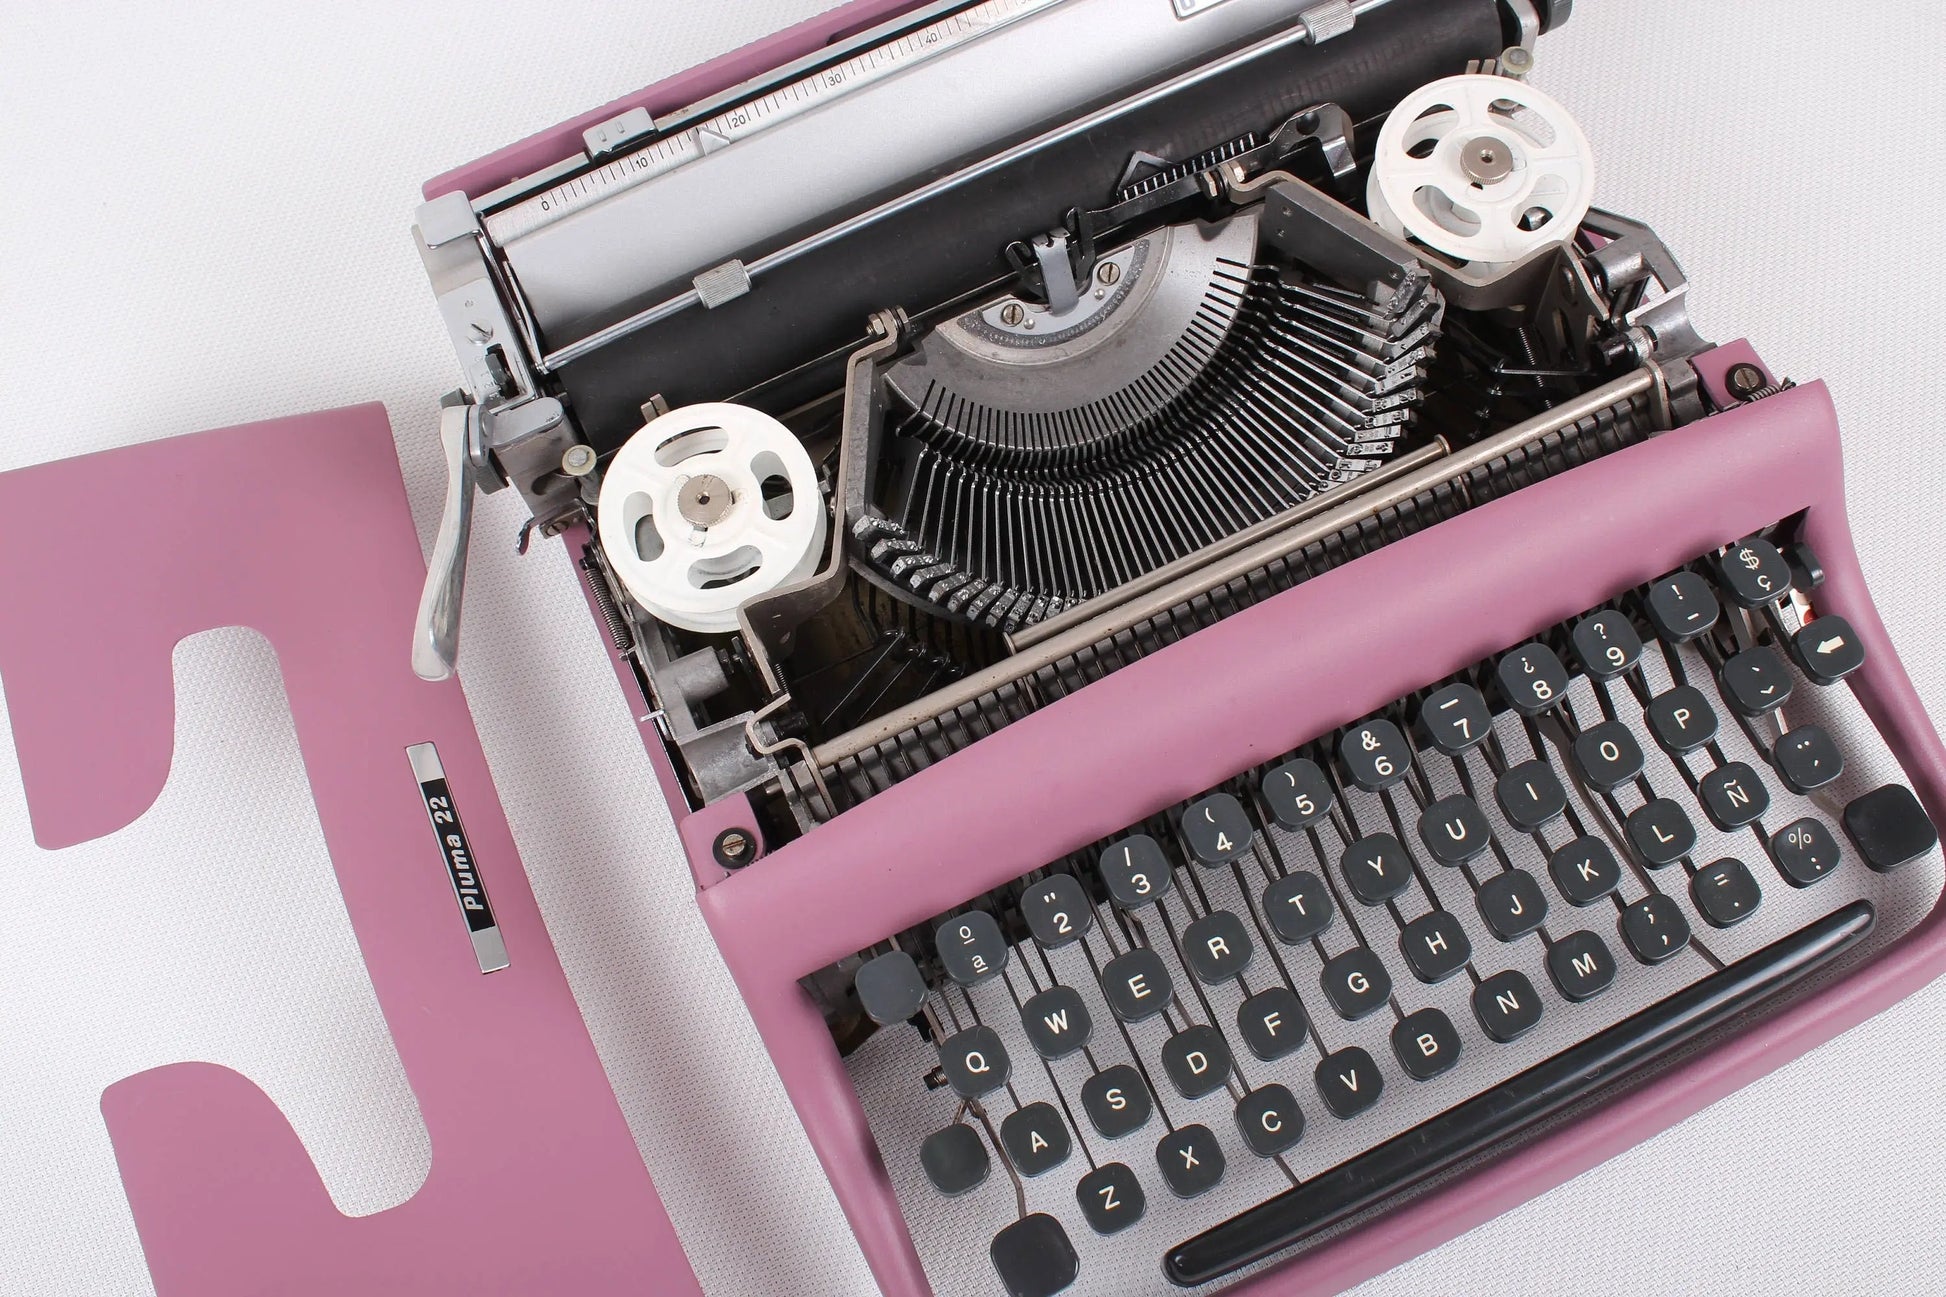 Olivetti Pluma 22 Pink Typewriter, Vintage, Mint Condition, Manual Portable, Professionally Serviced by Typewriter.Company - ElGranero Typewriter.Company